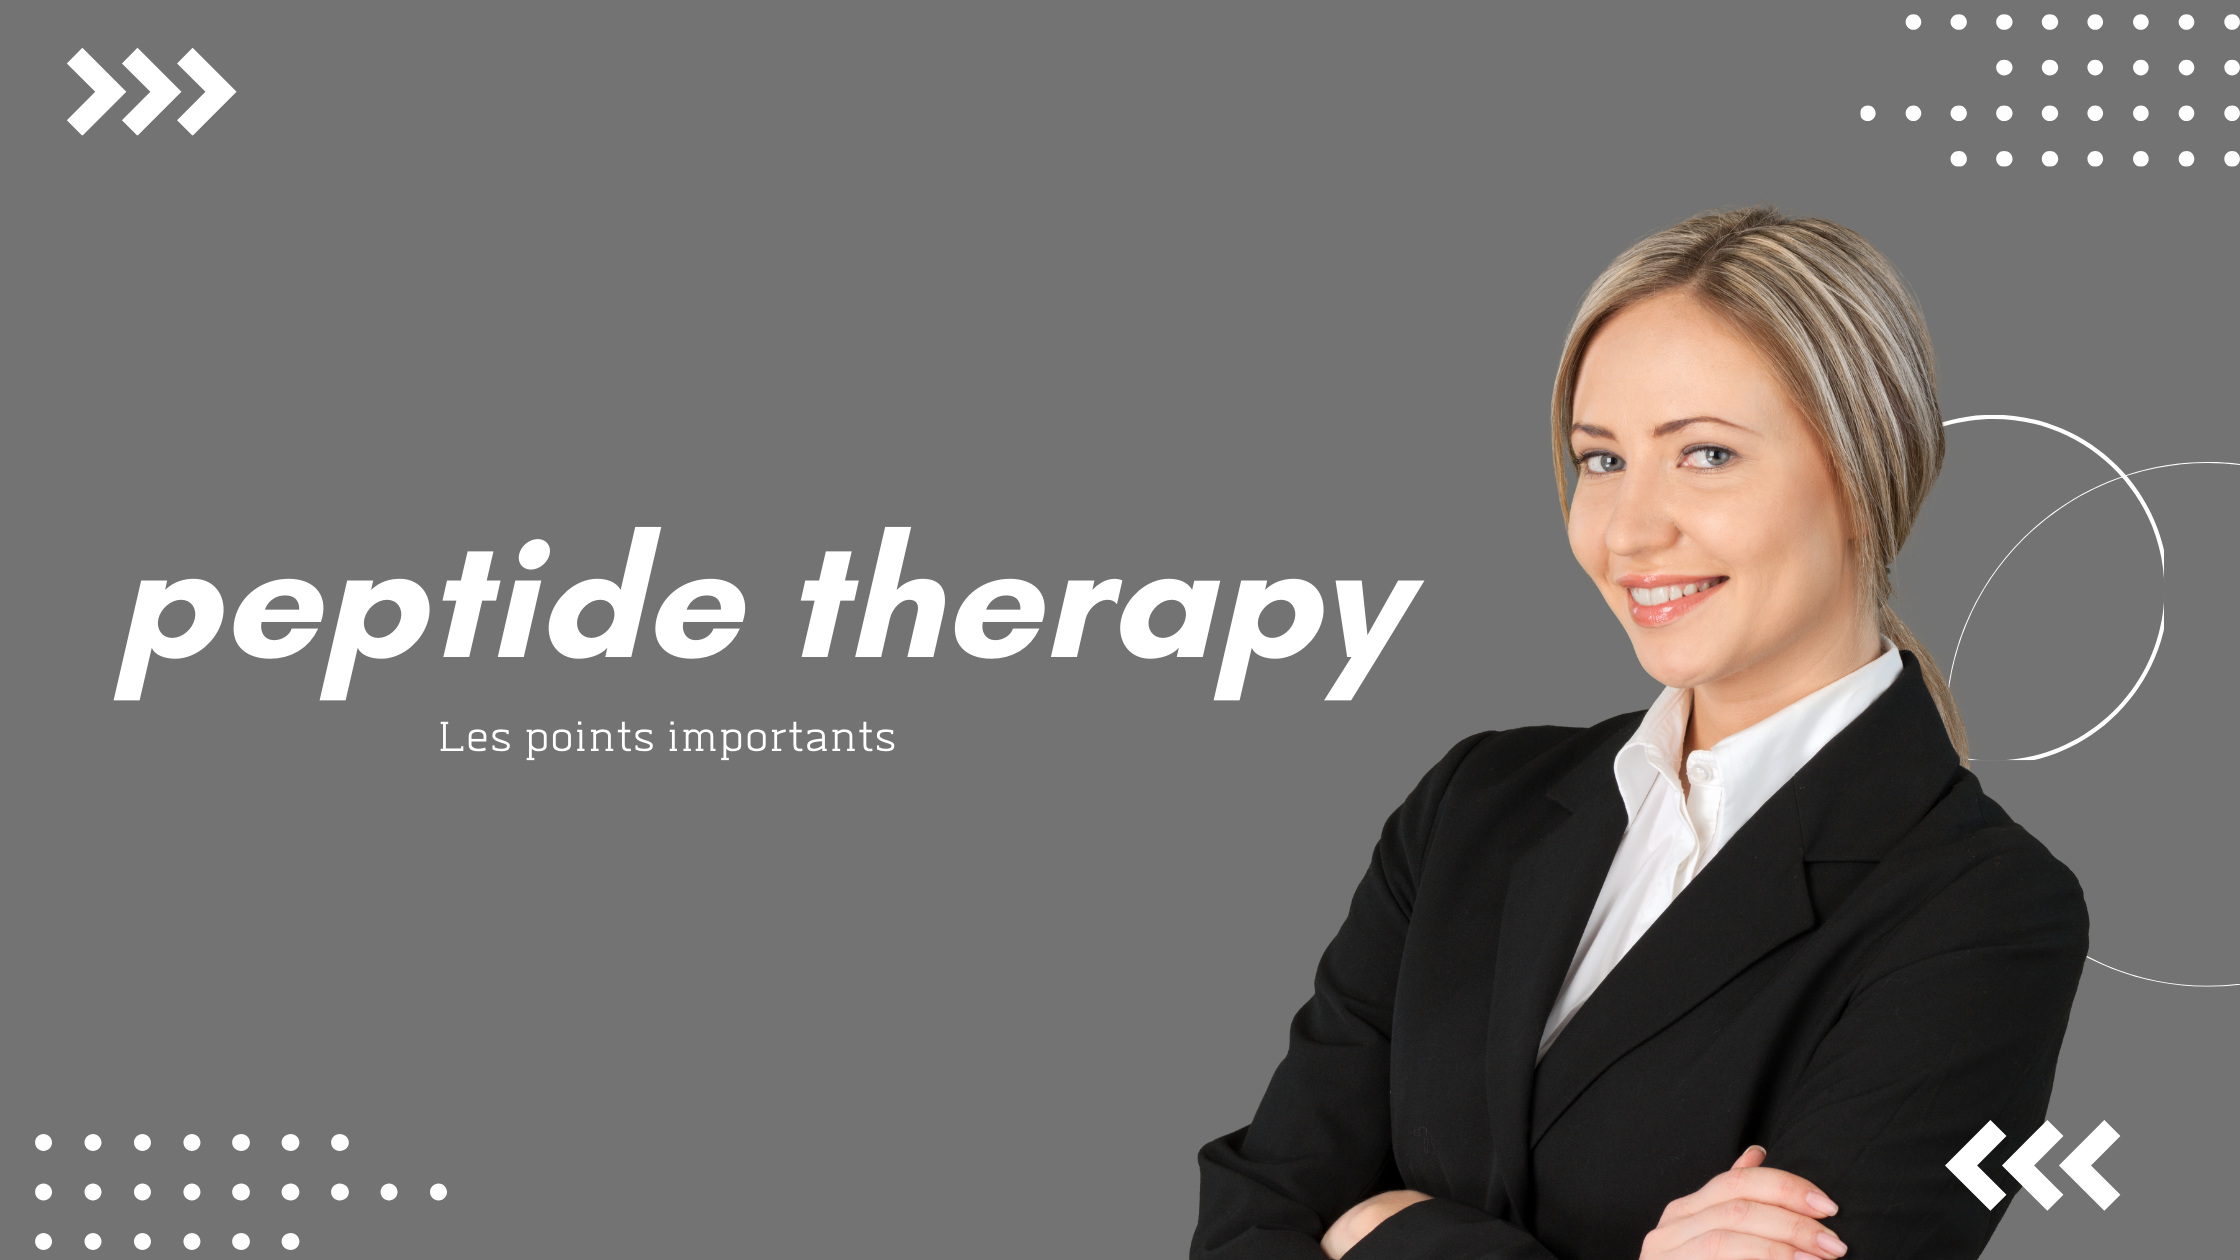 peptide therapy | Les points importants